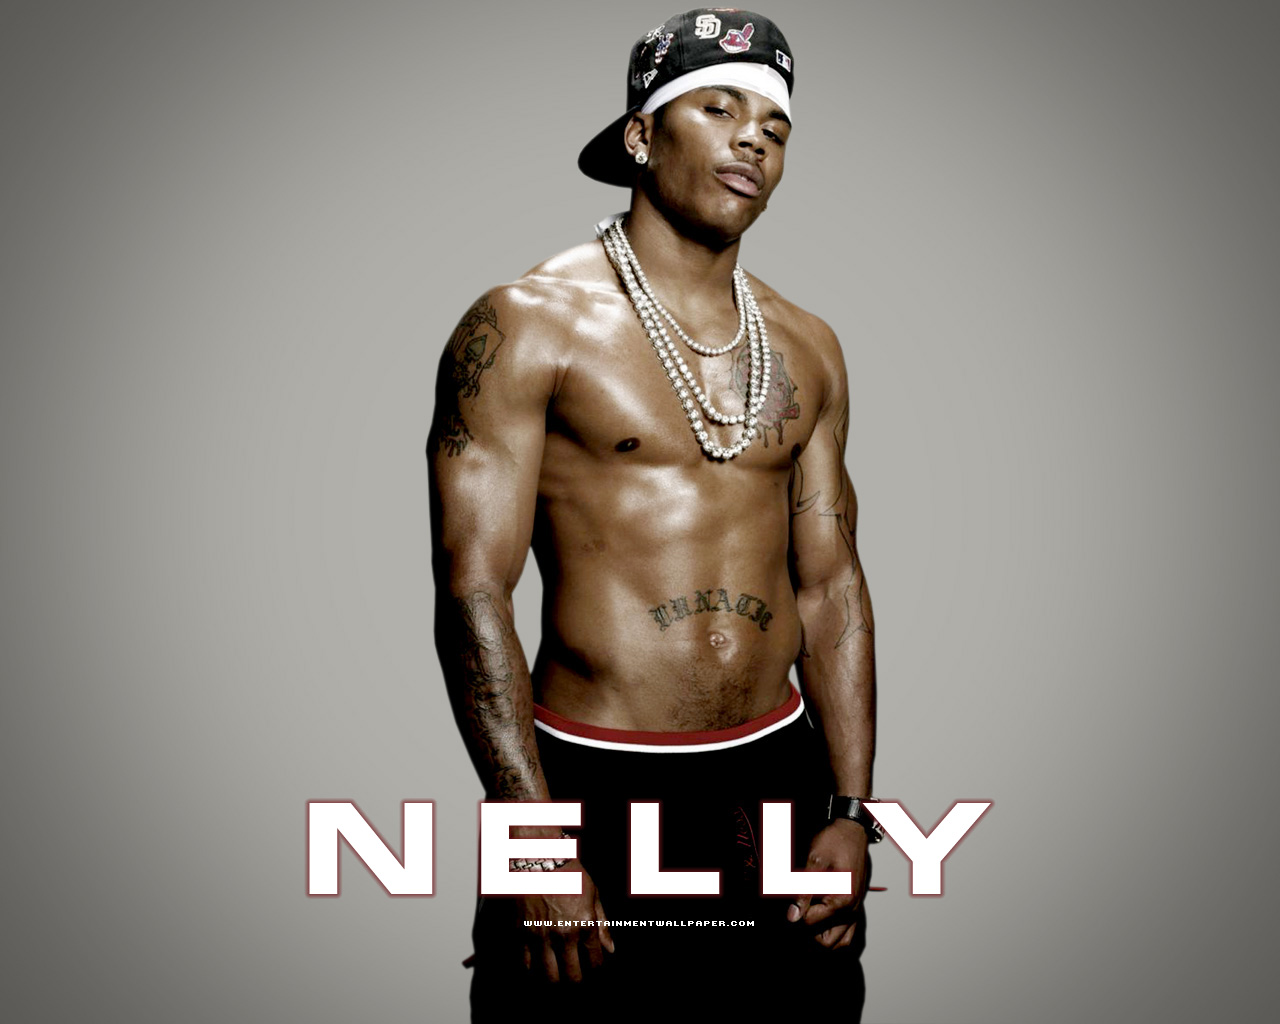 Nelly Wallpaper - Original size, download now.